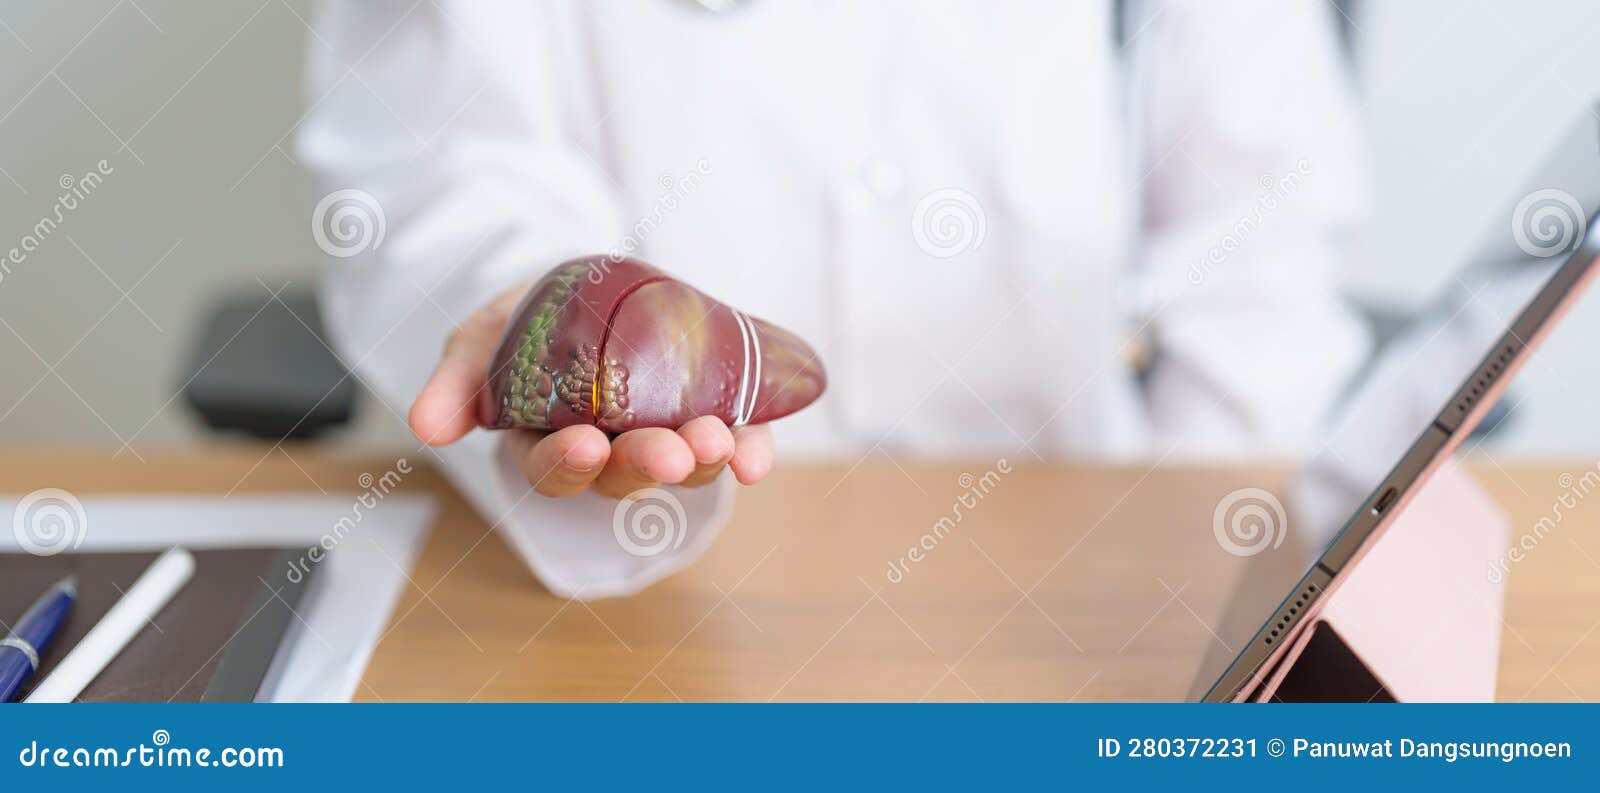 doctor with human liver model and tablet. liver cancer and tumor, jaundice, viral hepatitis a, b, c, d, e, cirrhosis, failure,